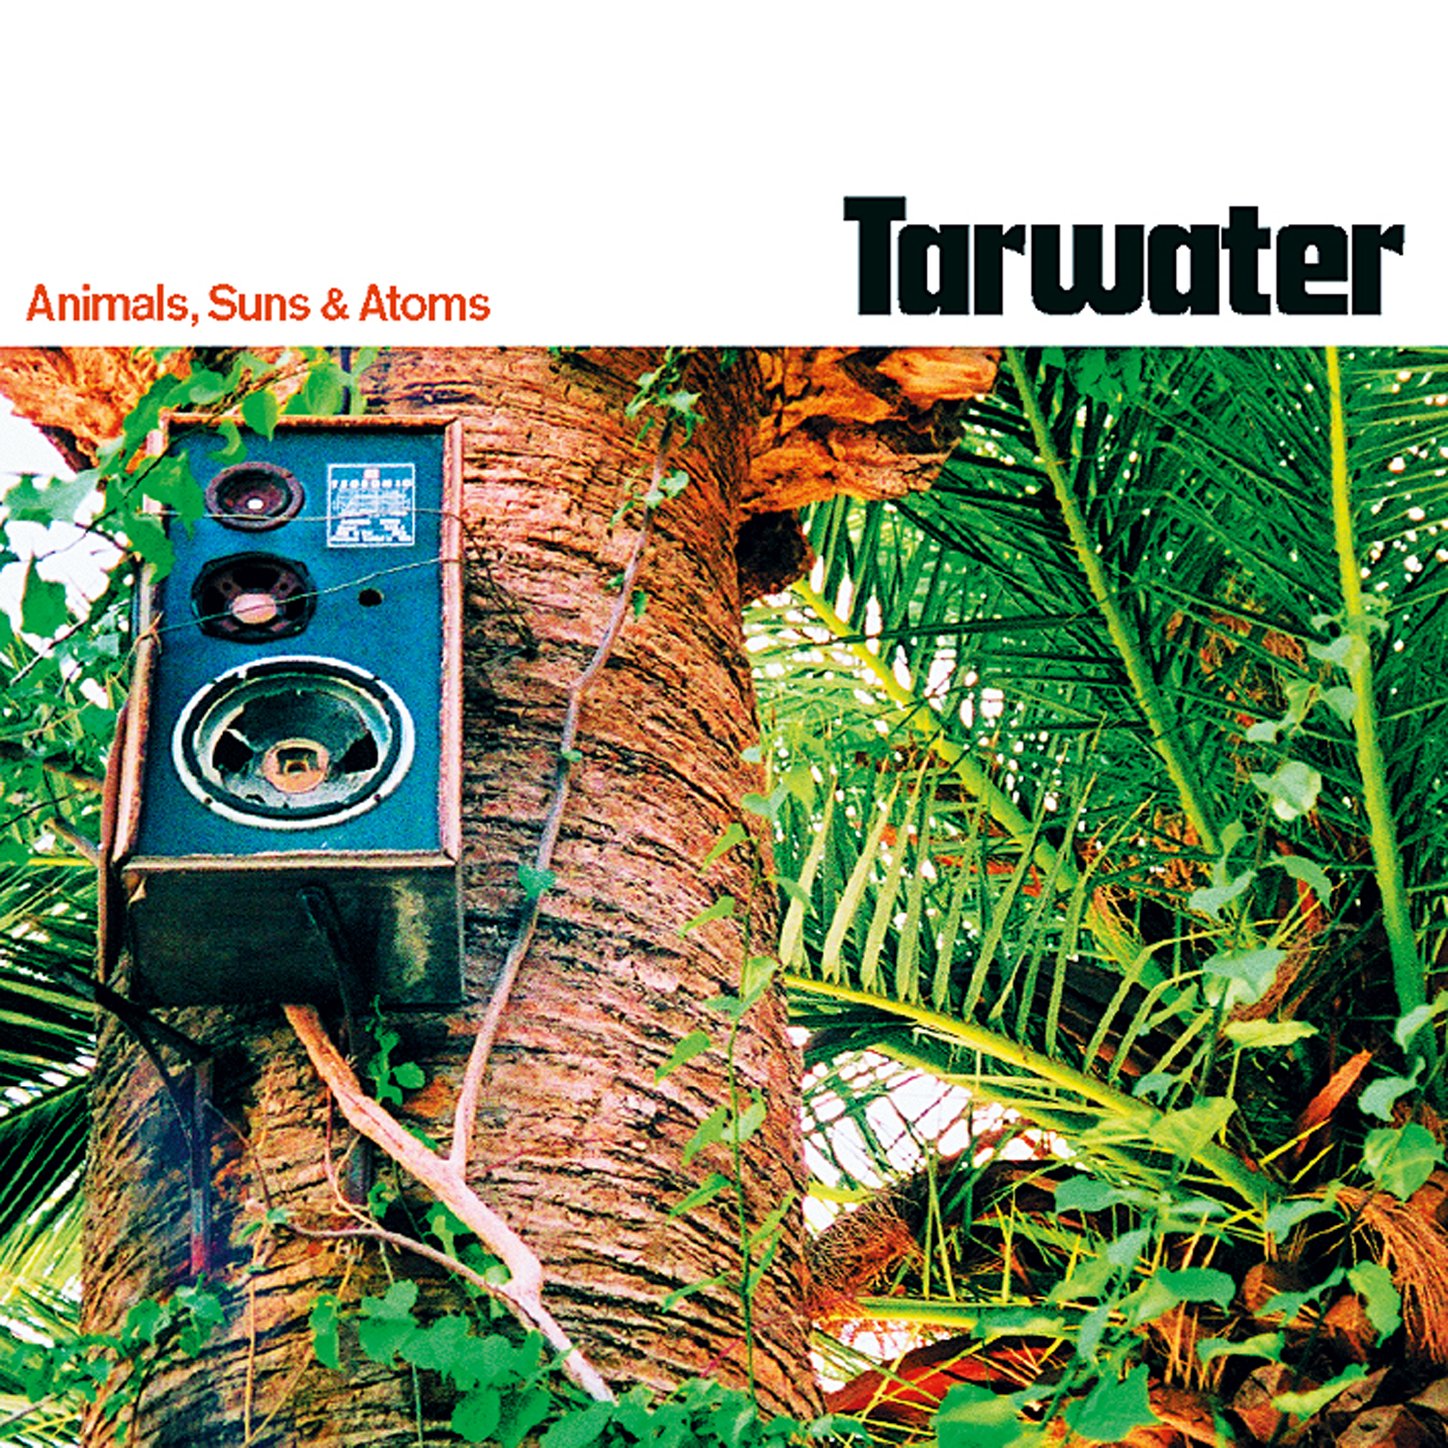 Tarwater-Animals Suns And Atoms-CD-FLAC-2000-401 Download